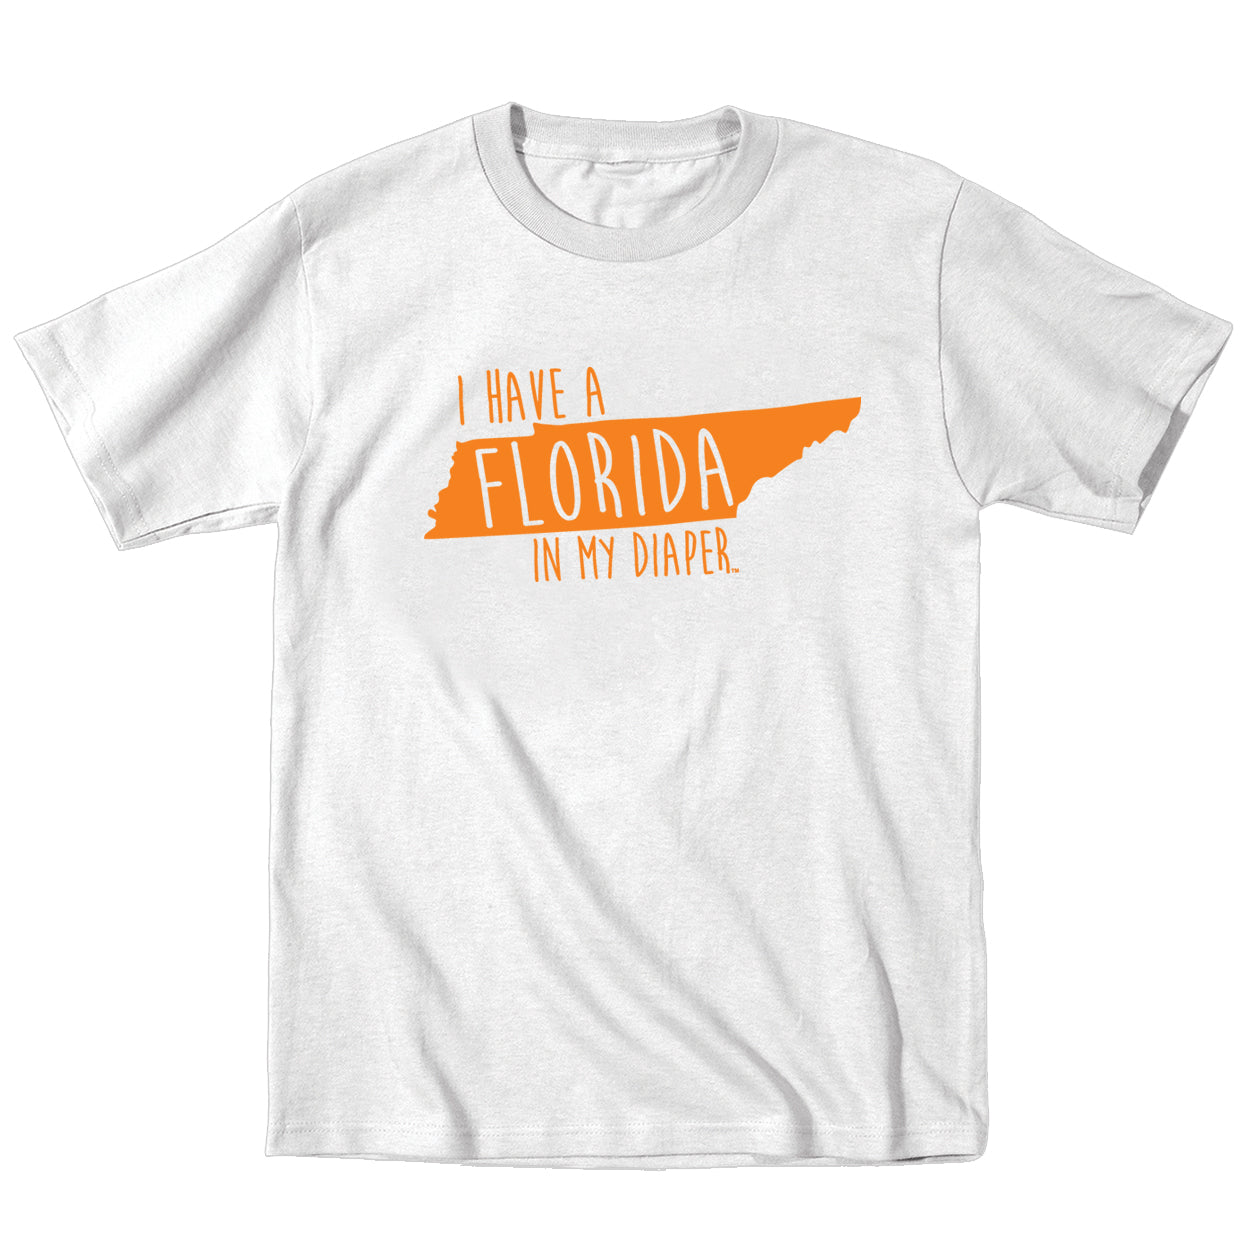 I HAVE A FLORIDA IN MY DIAPER Child Tee